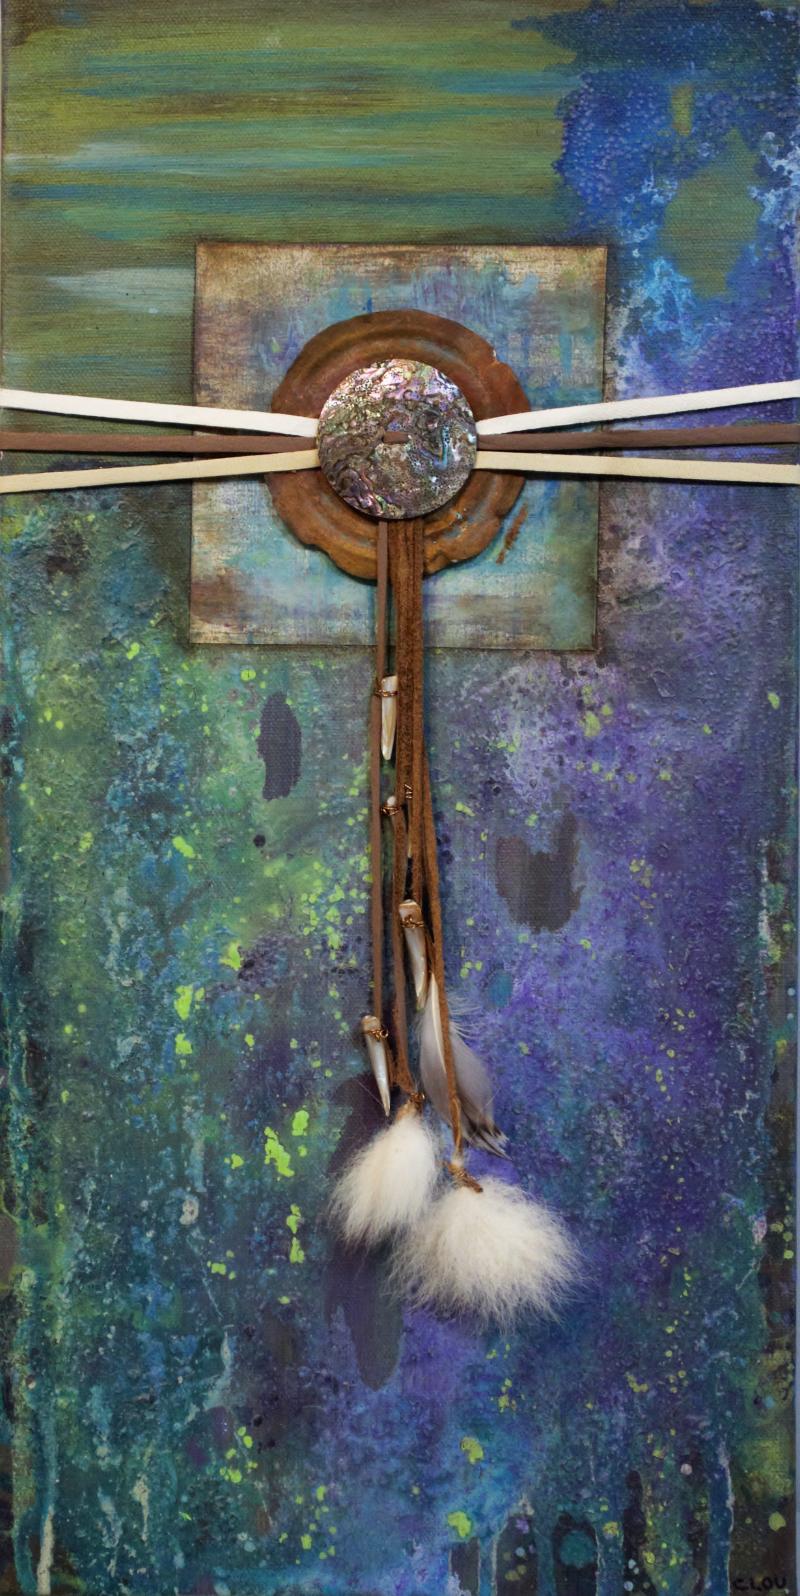 Solace, mixed media on canbas, natural & altered materials by Cindy Fuerstenberg of Pine City, MN